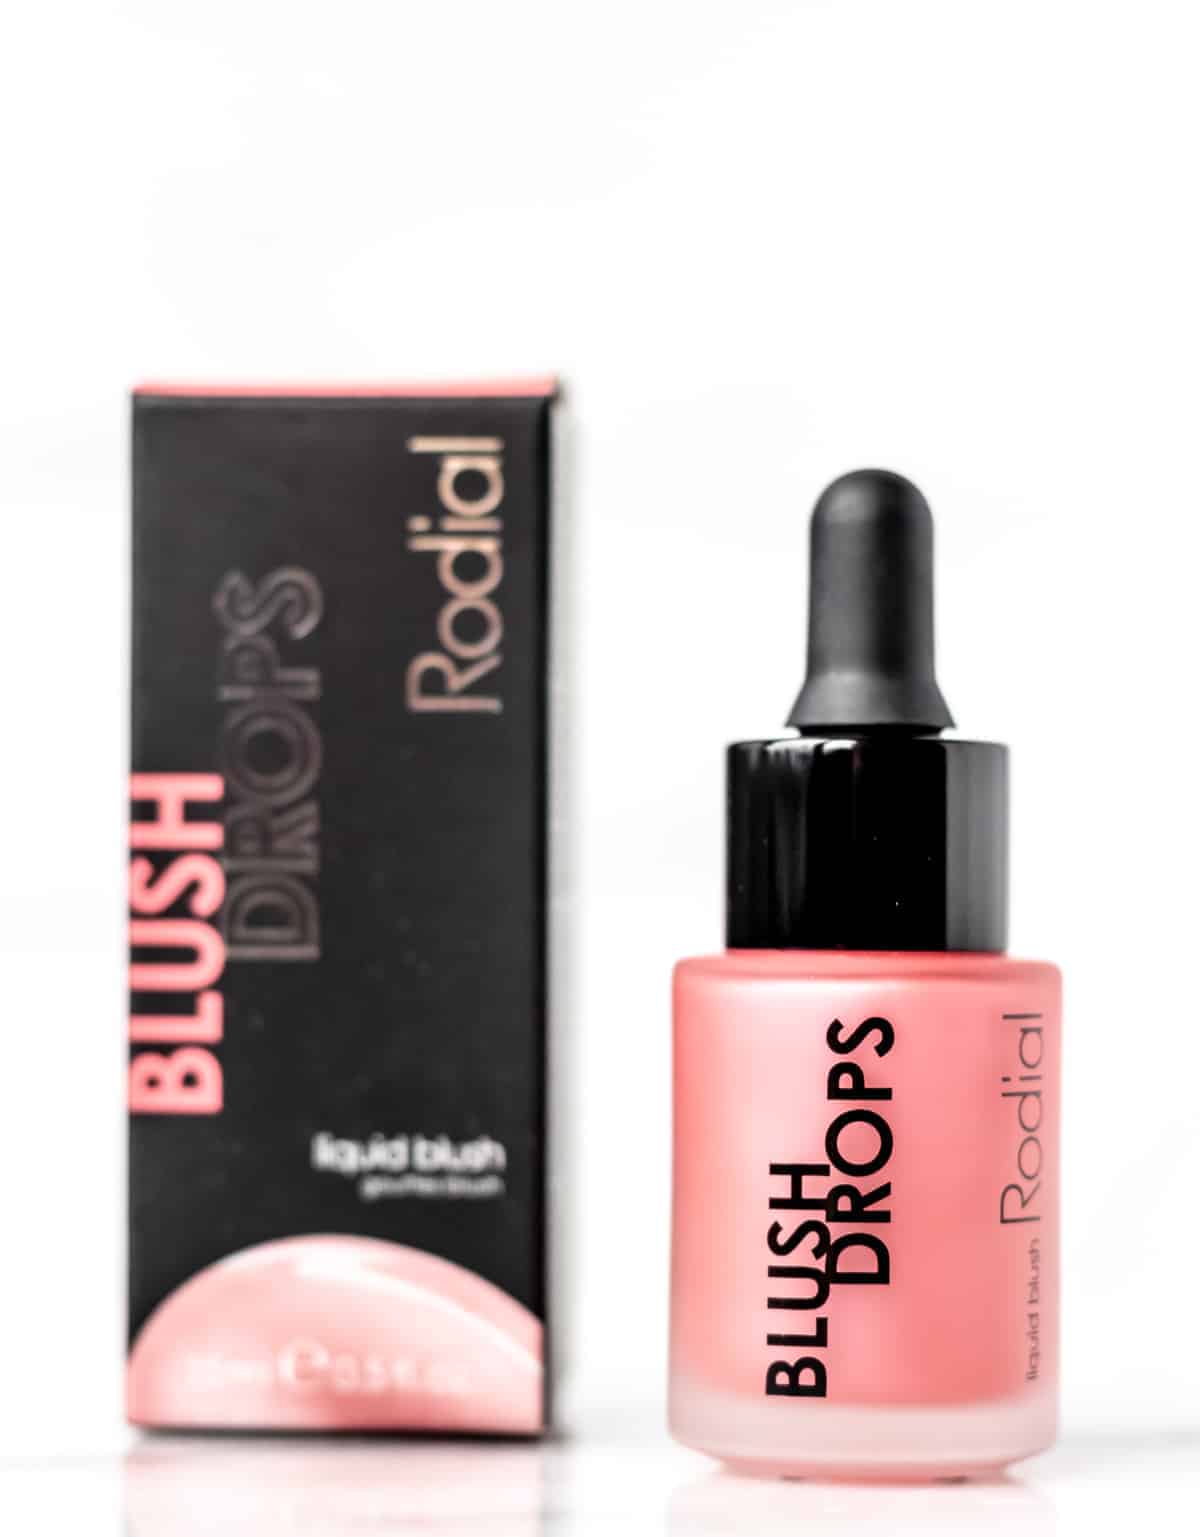 Rodial Blush Drops in Frosted Pink bottle and box on a white background.